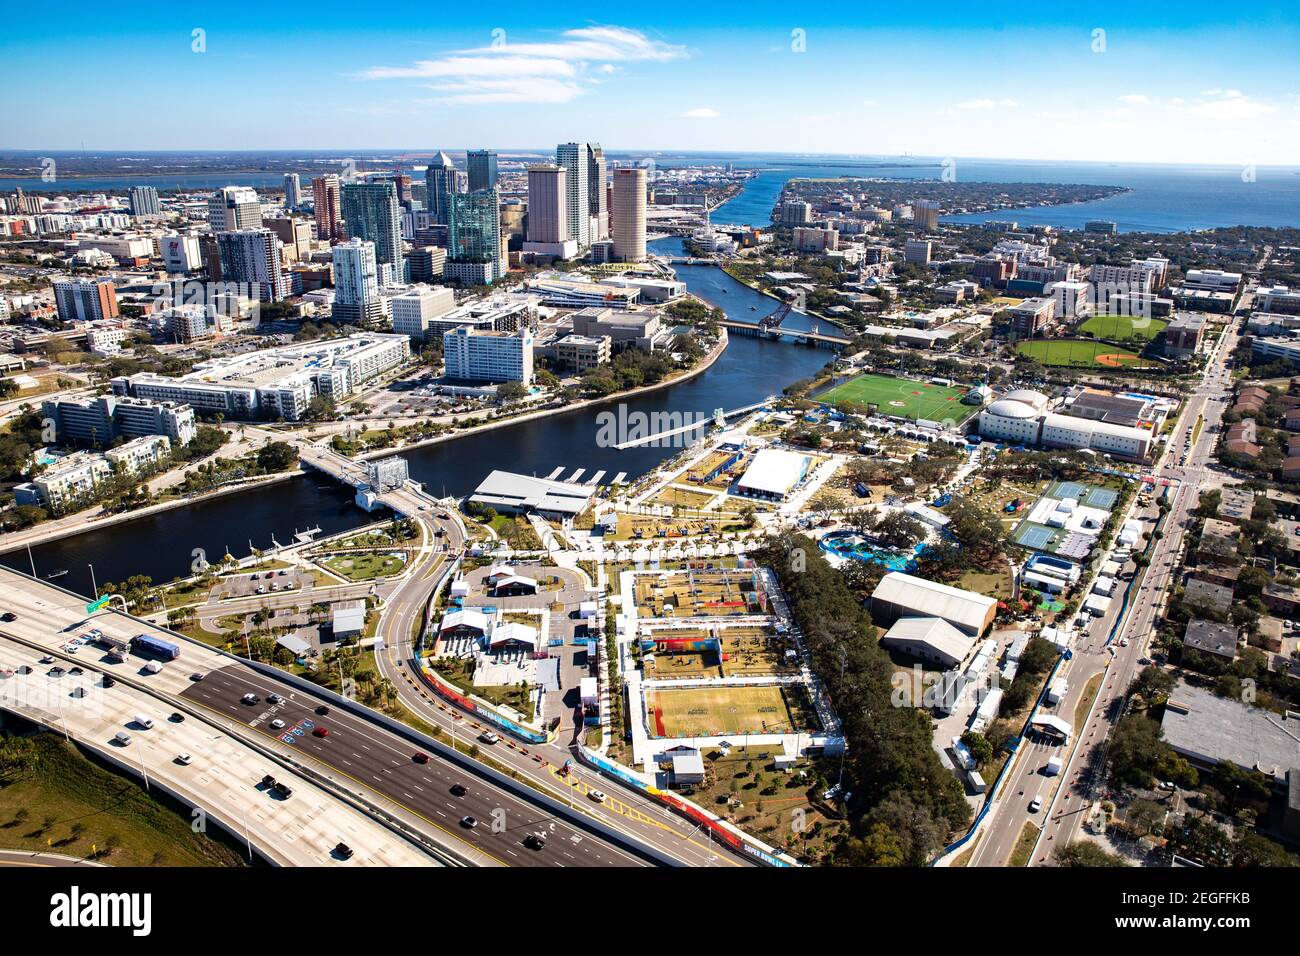 Aerial view of Raymond James Stadium practice fields and the city skyline in advance of Super Bowl LV February 2, 2021 in Tampa, Florida. Stock Photo